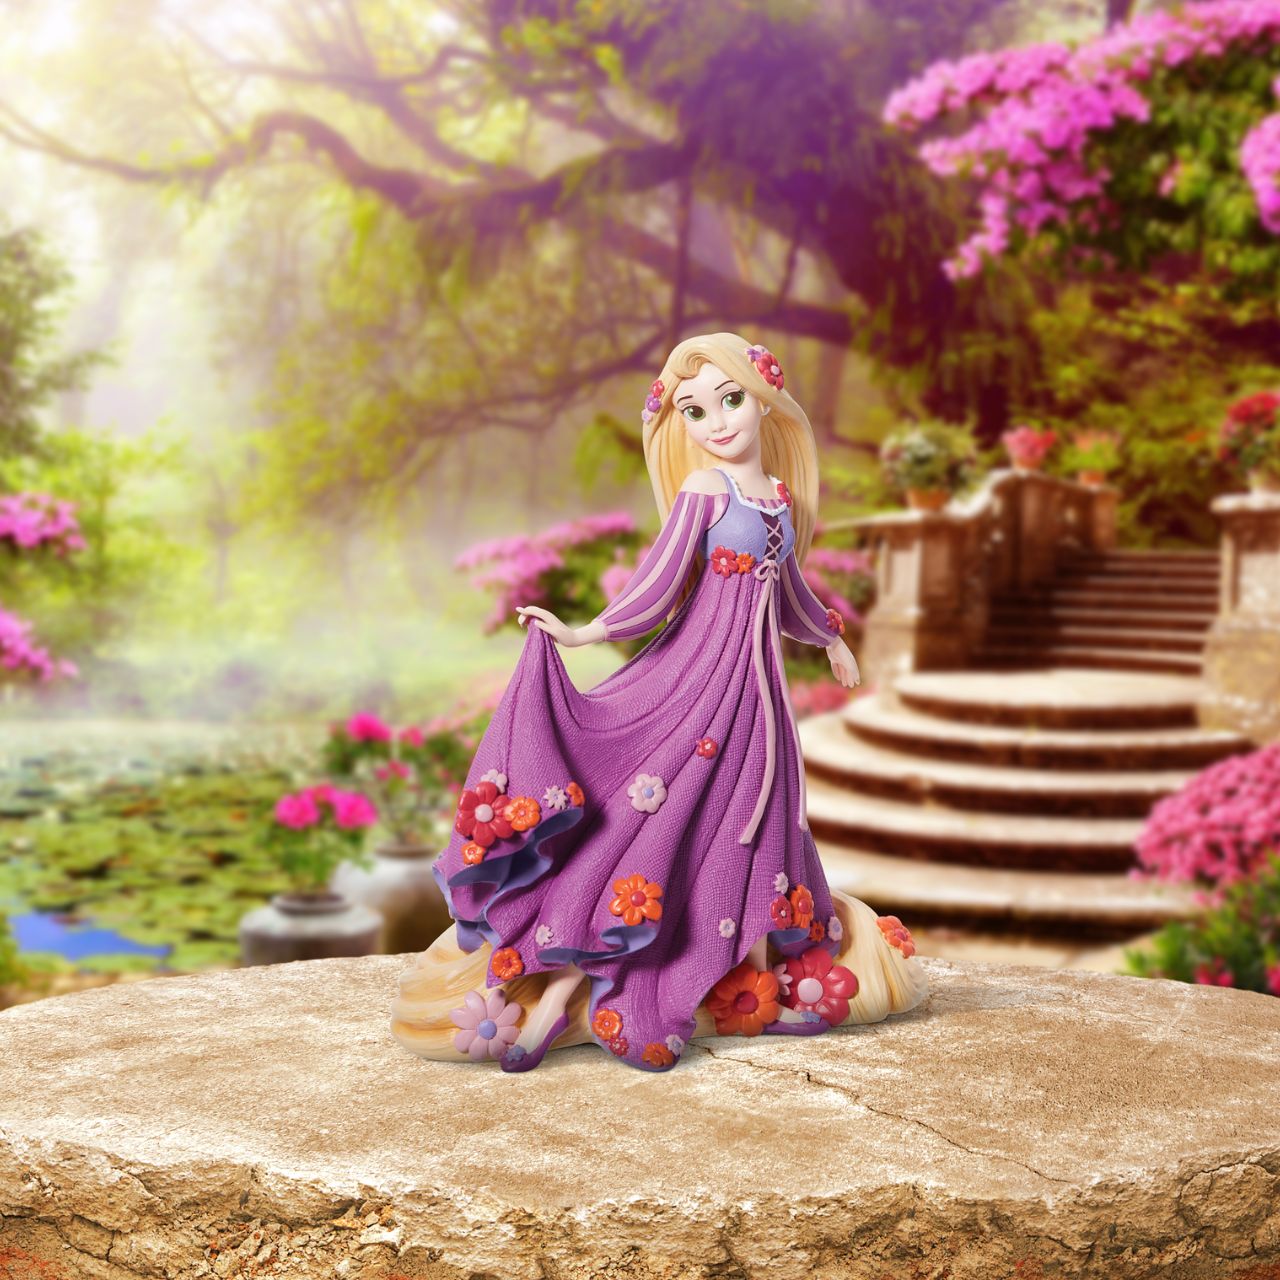 Disney Showcase shows a stunning new Botanical collection with Disney legends surrounded in 3D sculpted florals. No detail is overlooked, from a textured dress to sculpted florals, this figurine from Disney' animated film Tangled is made from cast stone.